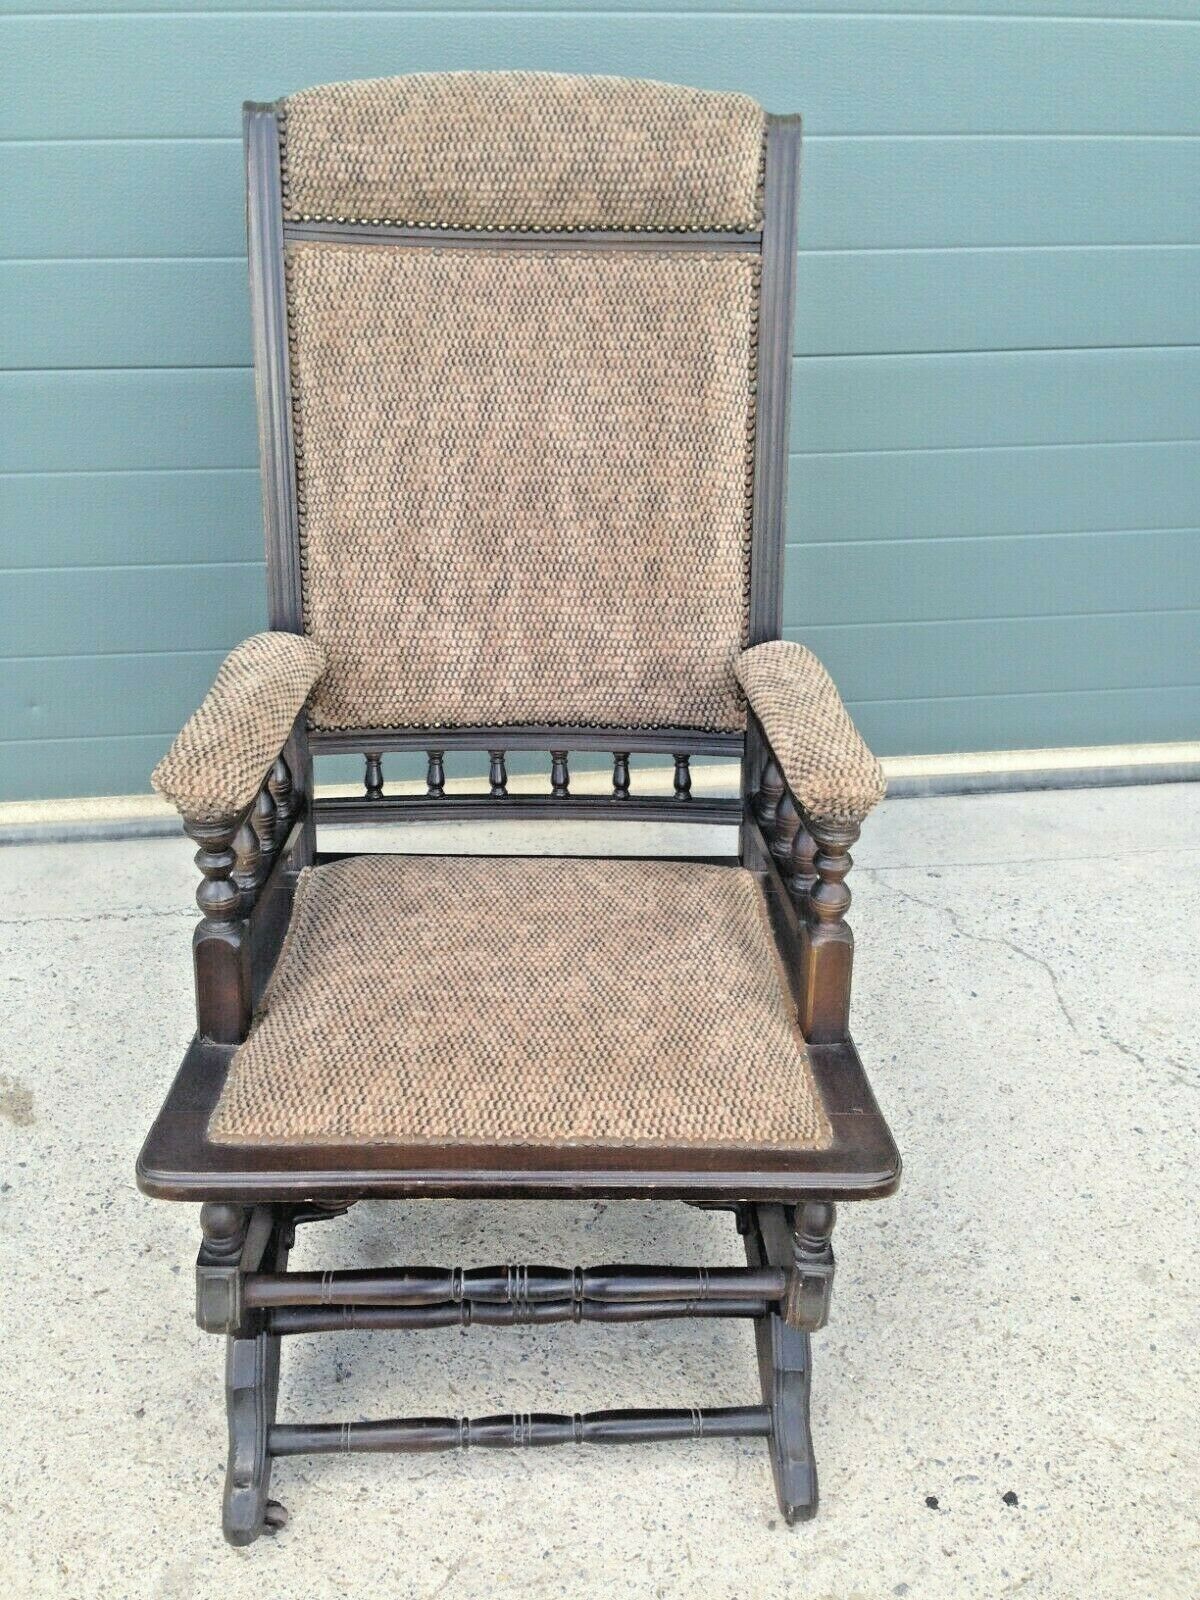 Old American Rocking Chair / Antique Rocking Chair SOLD